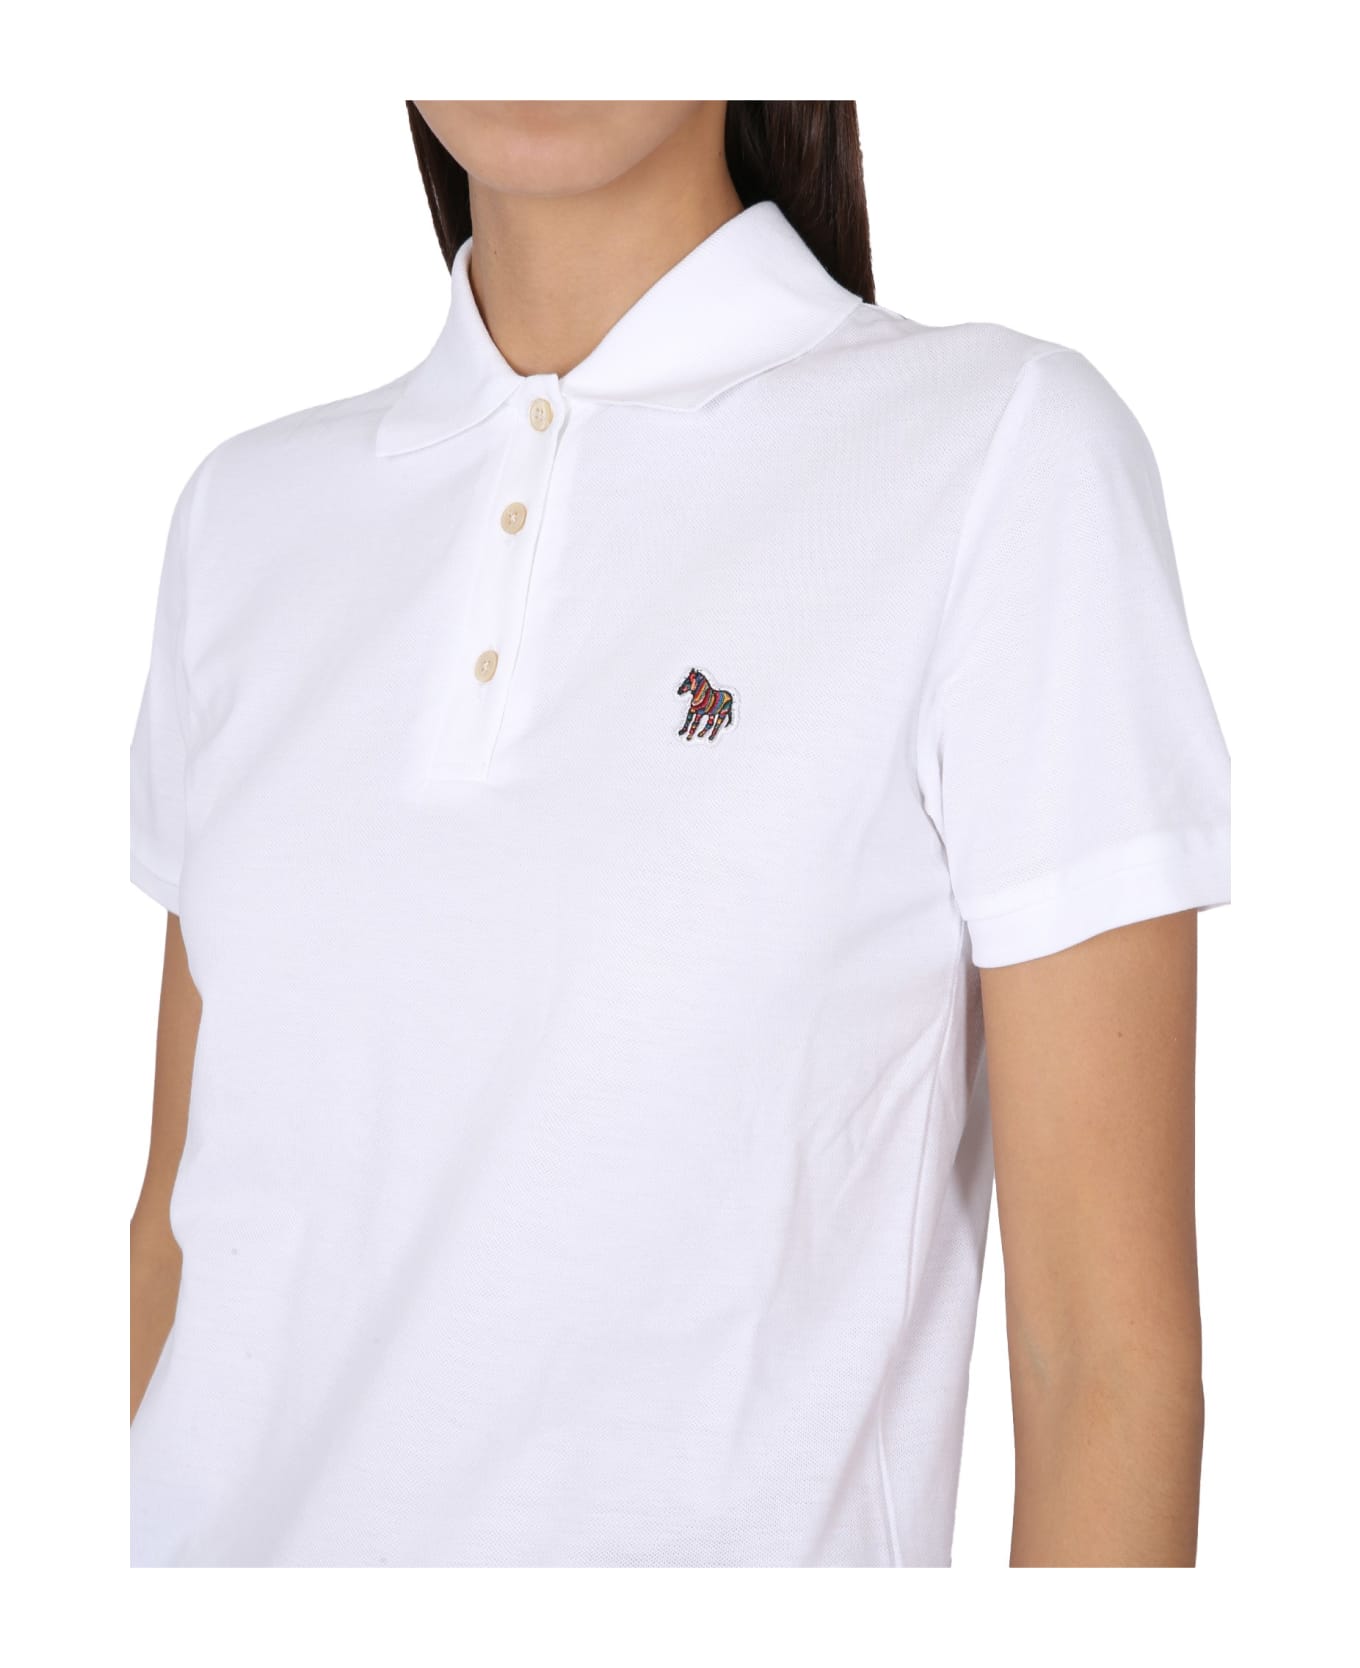 Paul Smith Polo Shirt With Zebra Patch - WHITE ポロシャツ